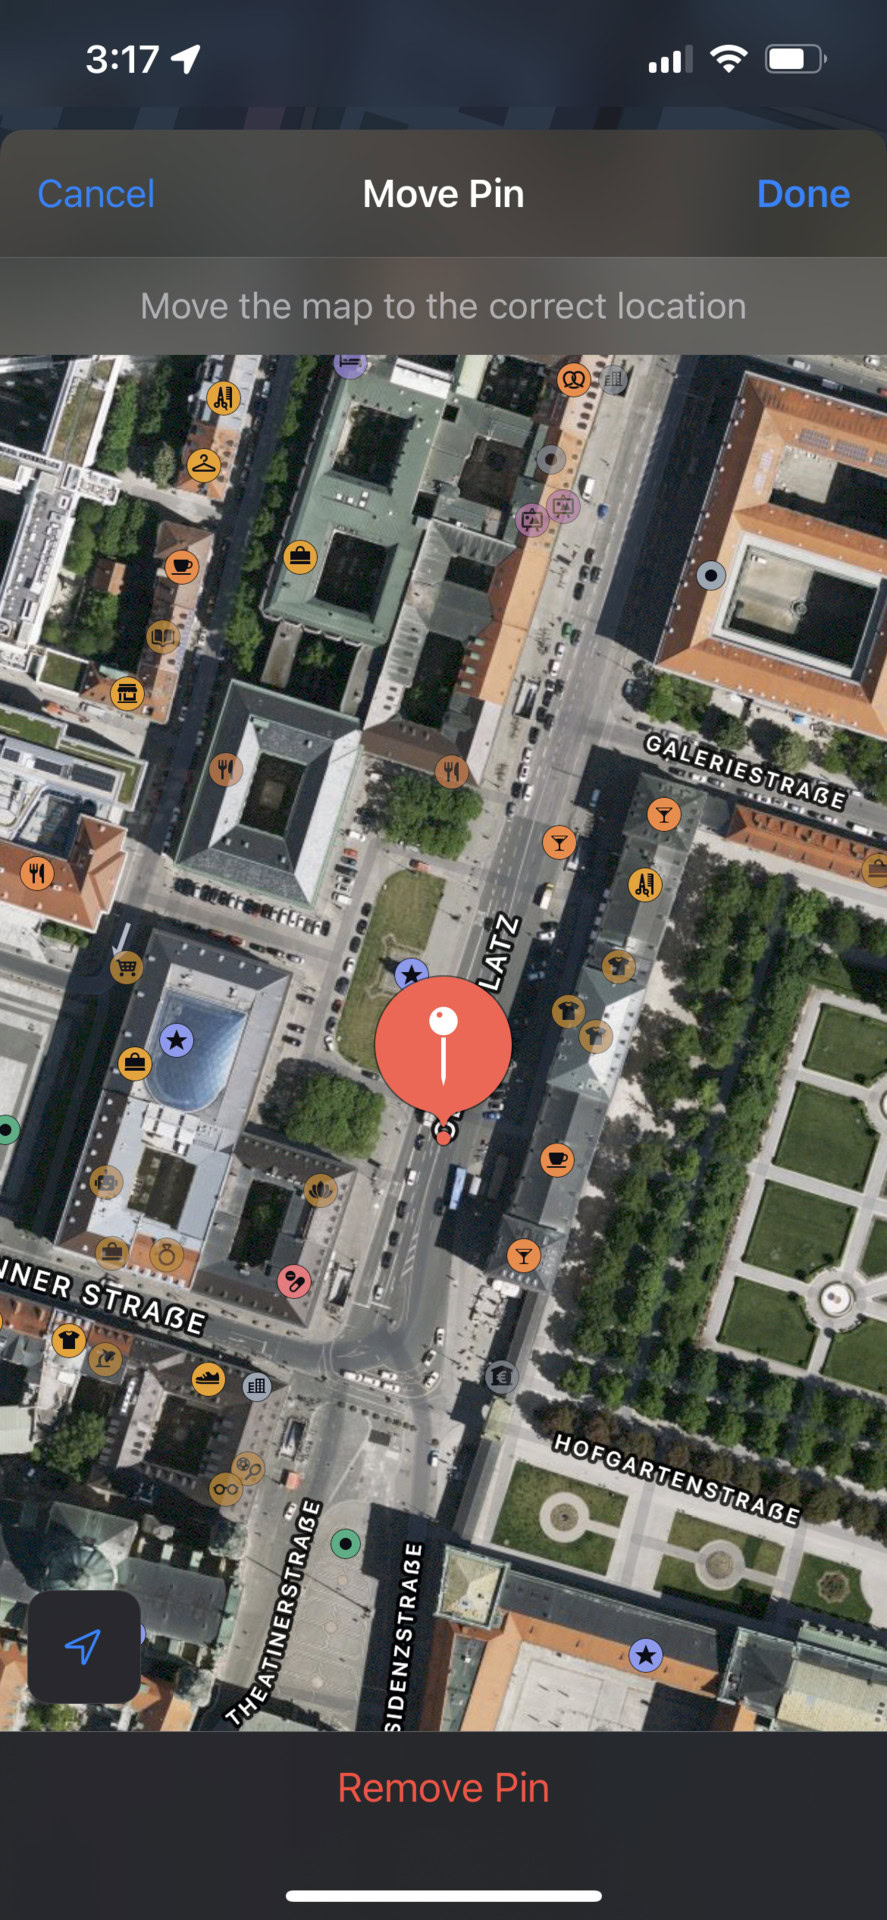 Moving an Apple Maps pin